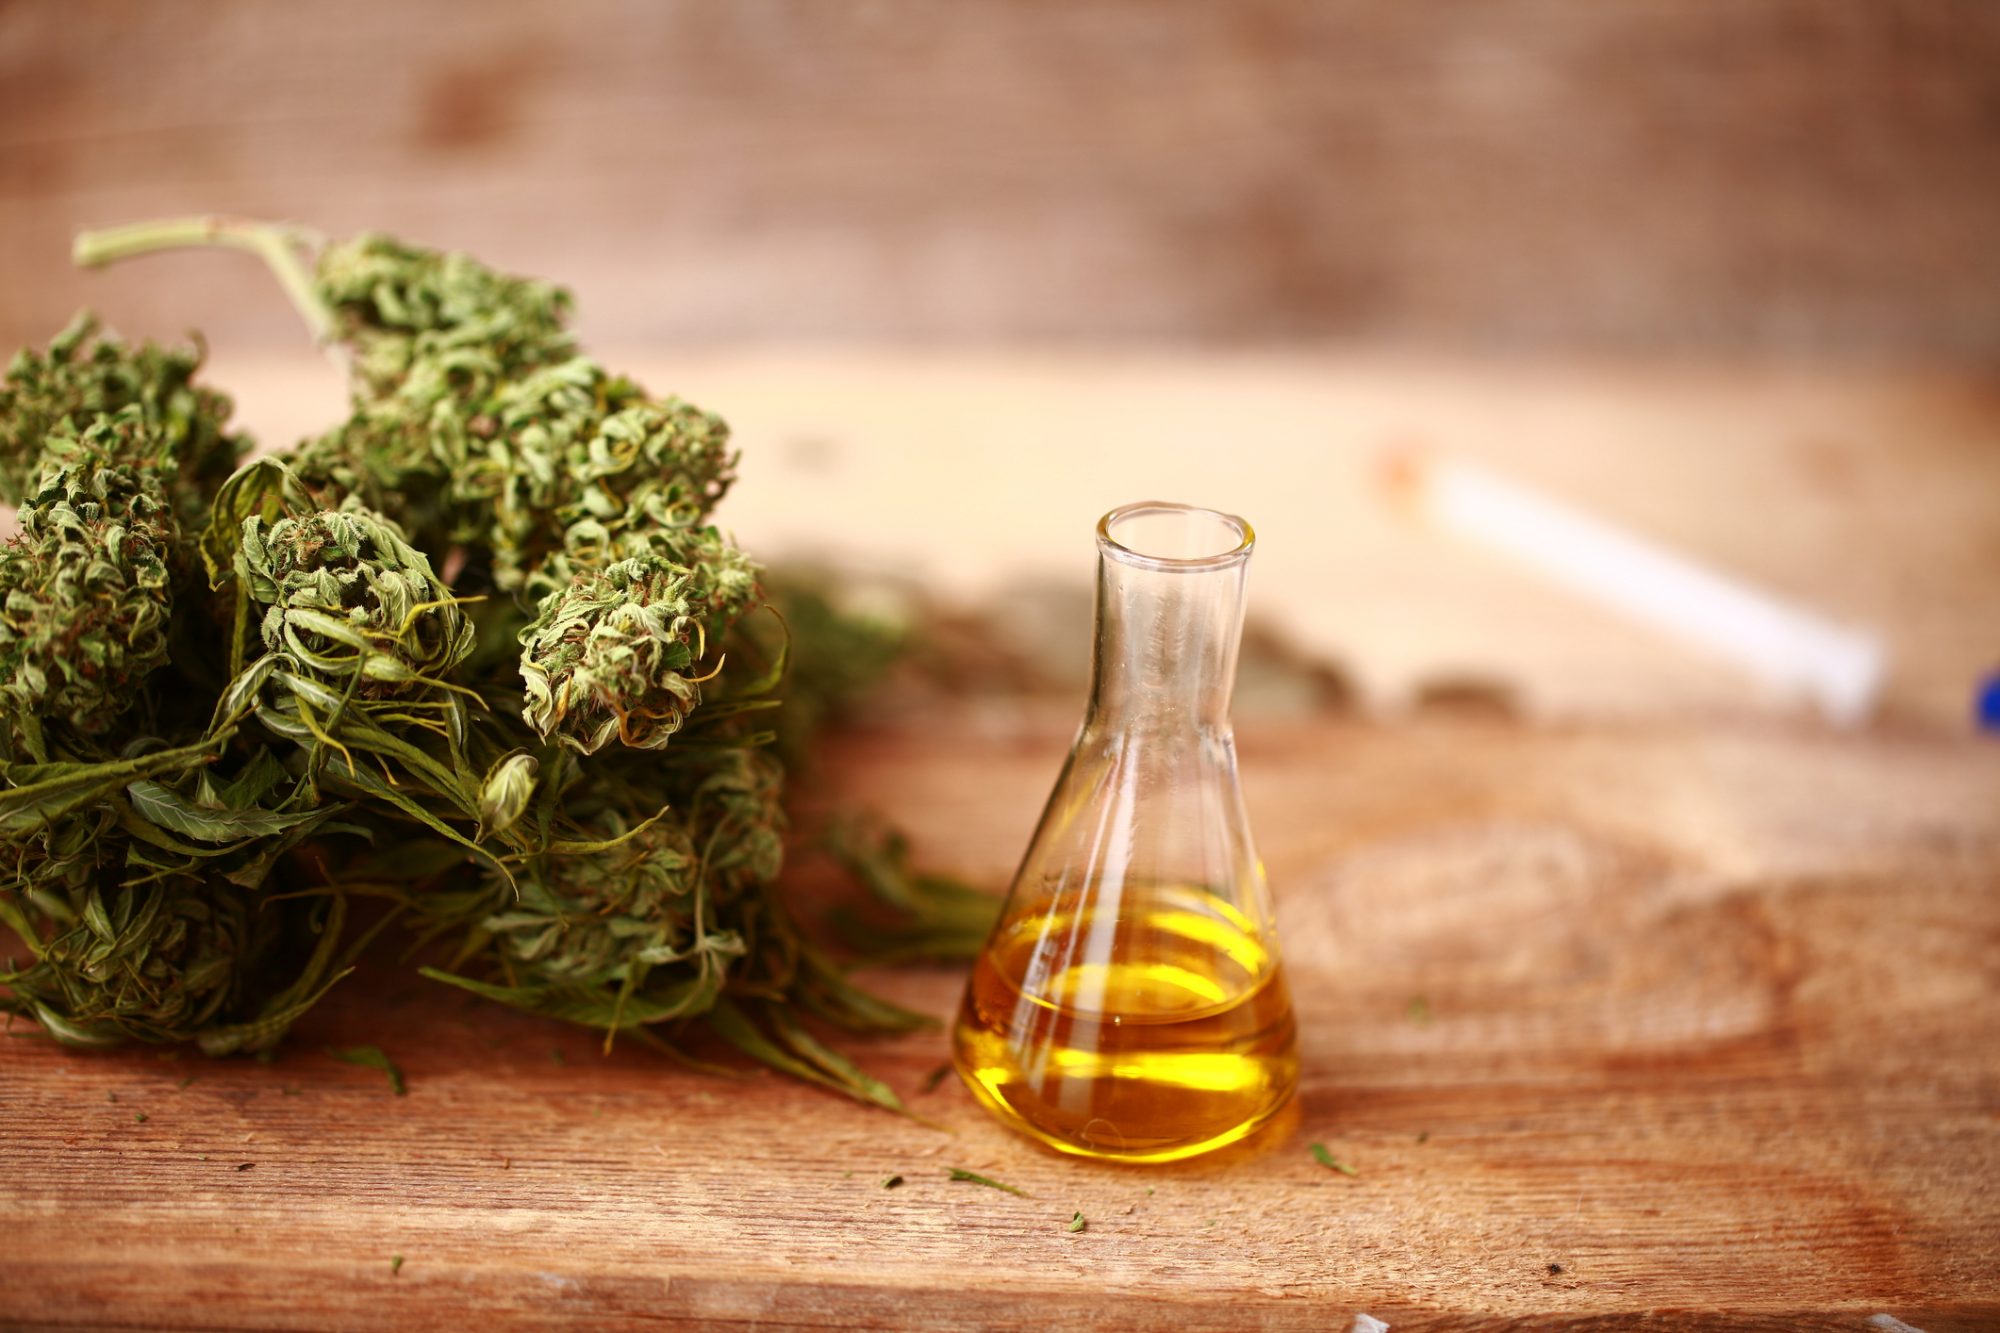 Is There a Distinction Between CBD Isolate and Whole-Range CBD Oils?